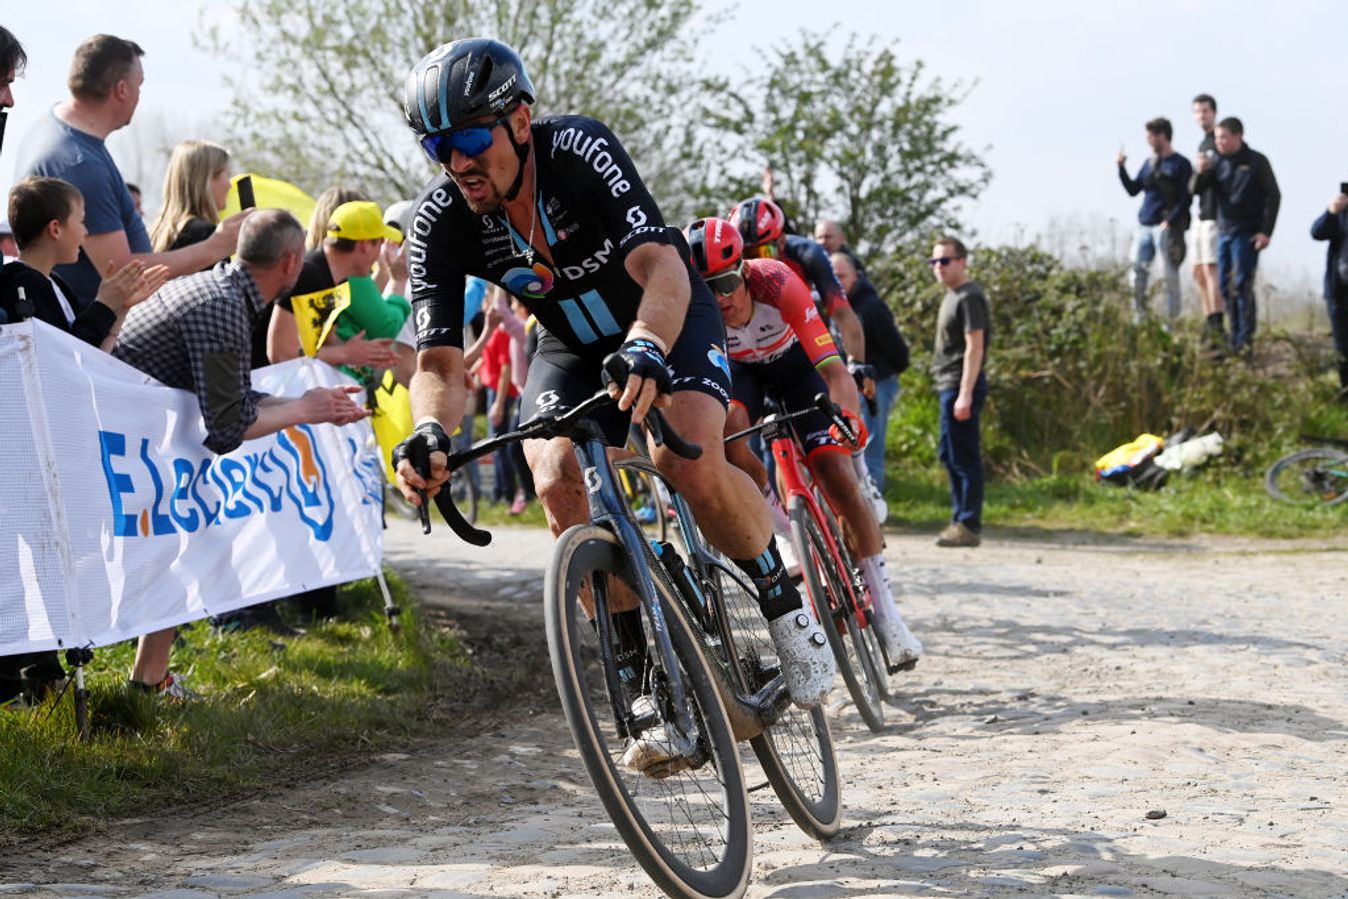 Degenkolb was one of the strongest riders at 2023 Paris-Roubaix but couldn't claim a second victory